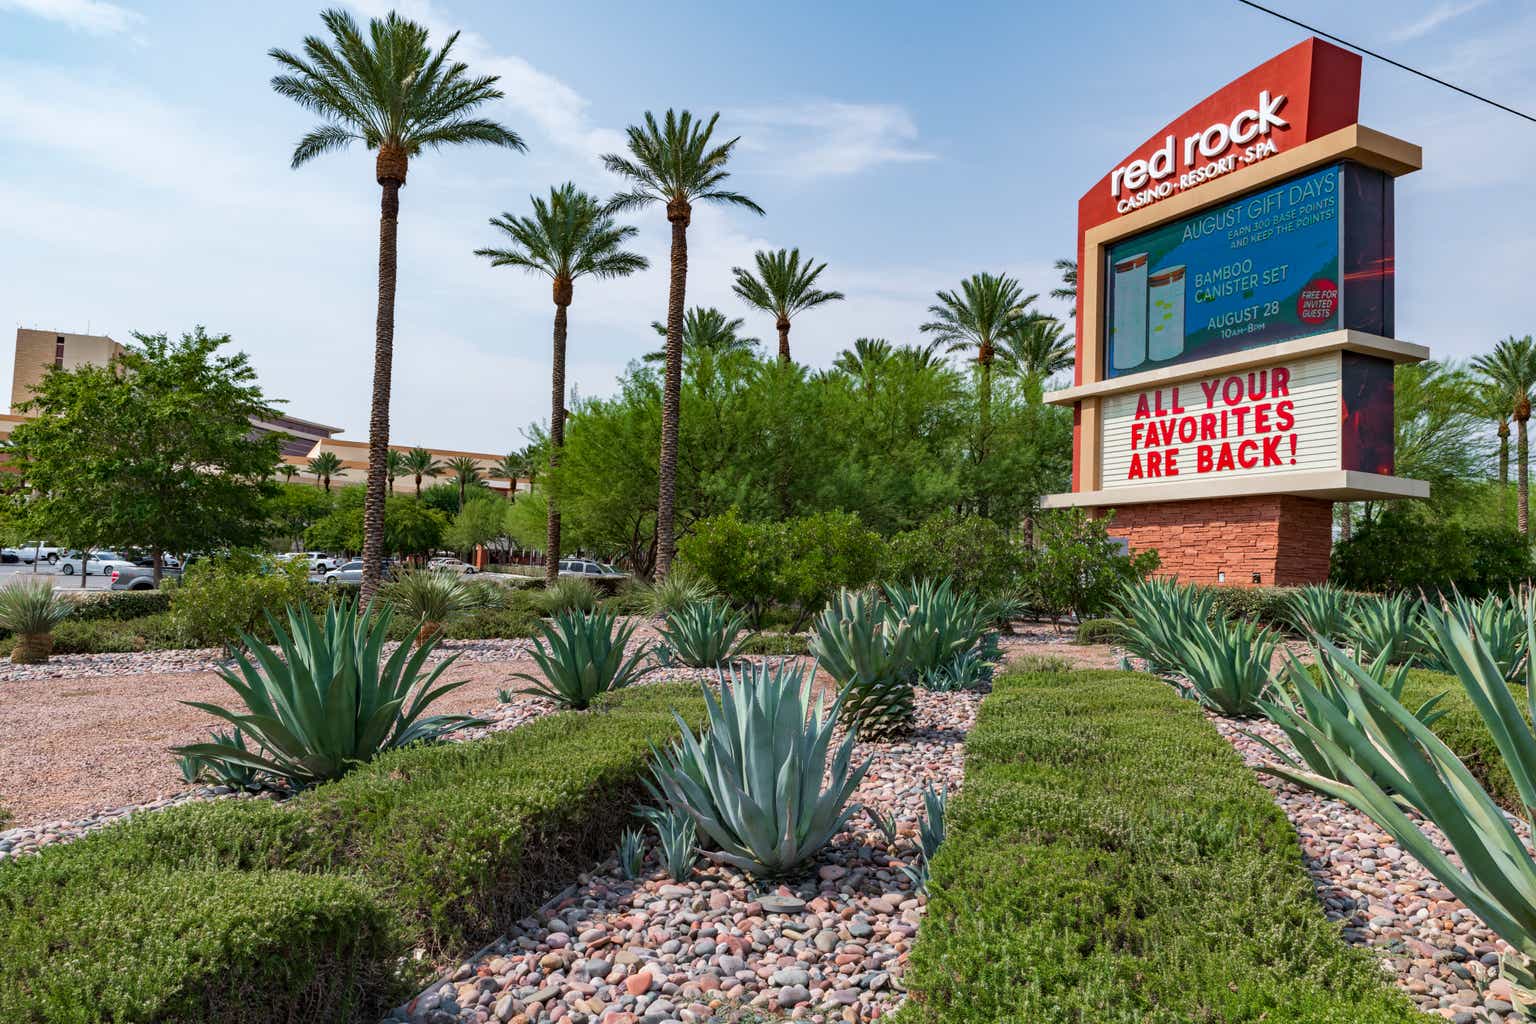 Red Rock Resorts: Overvalued When Accounting For Risk At Current Highs